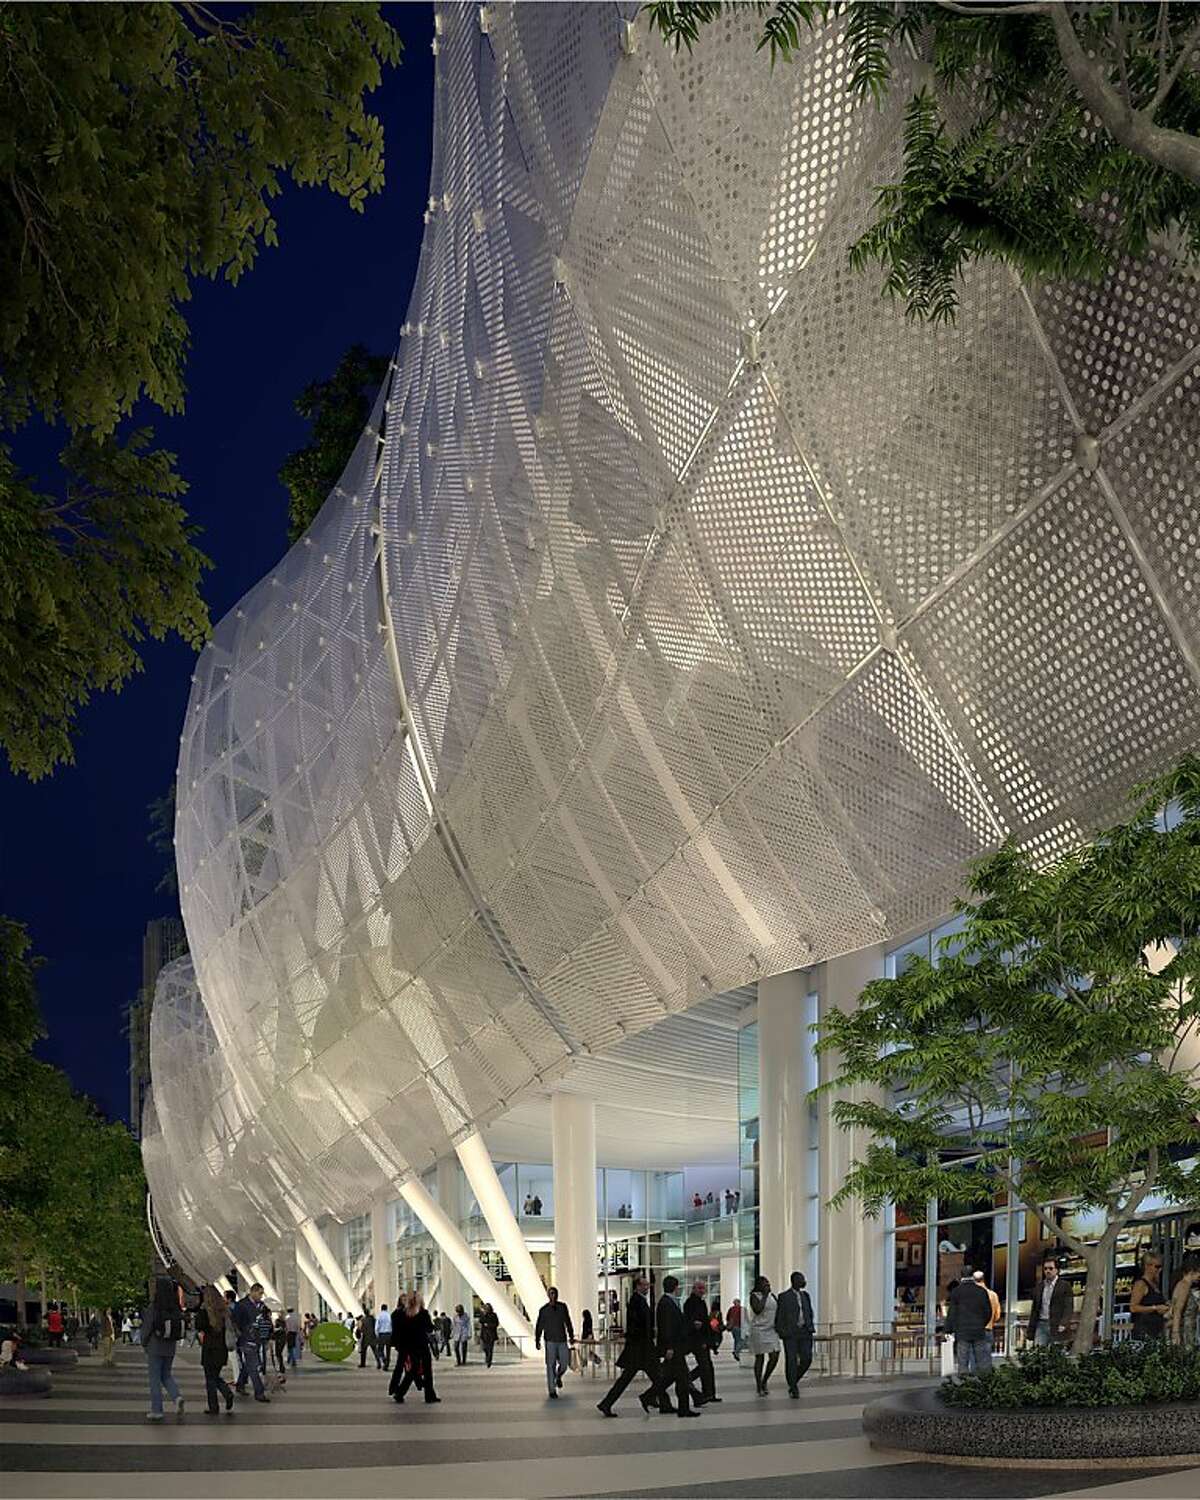 This a night image of the proposed change to the skin of the new Transbay Transit Center set to open in 2017. The architects are now proposing a see-through skin of aluminum, with extra illumination at night.